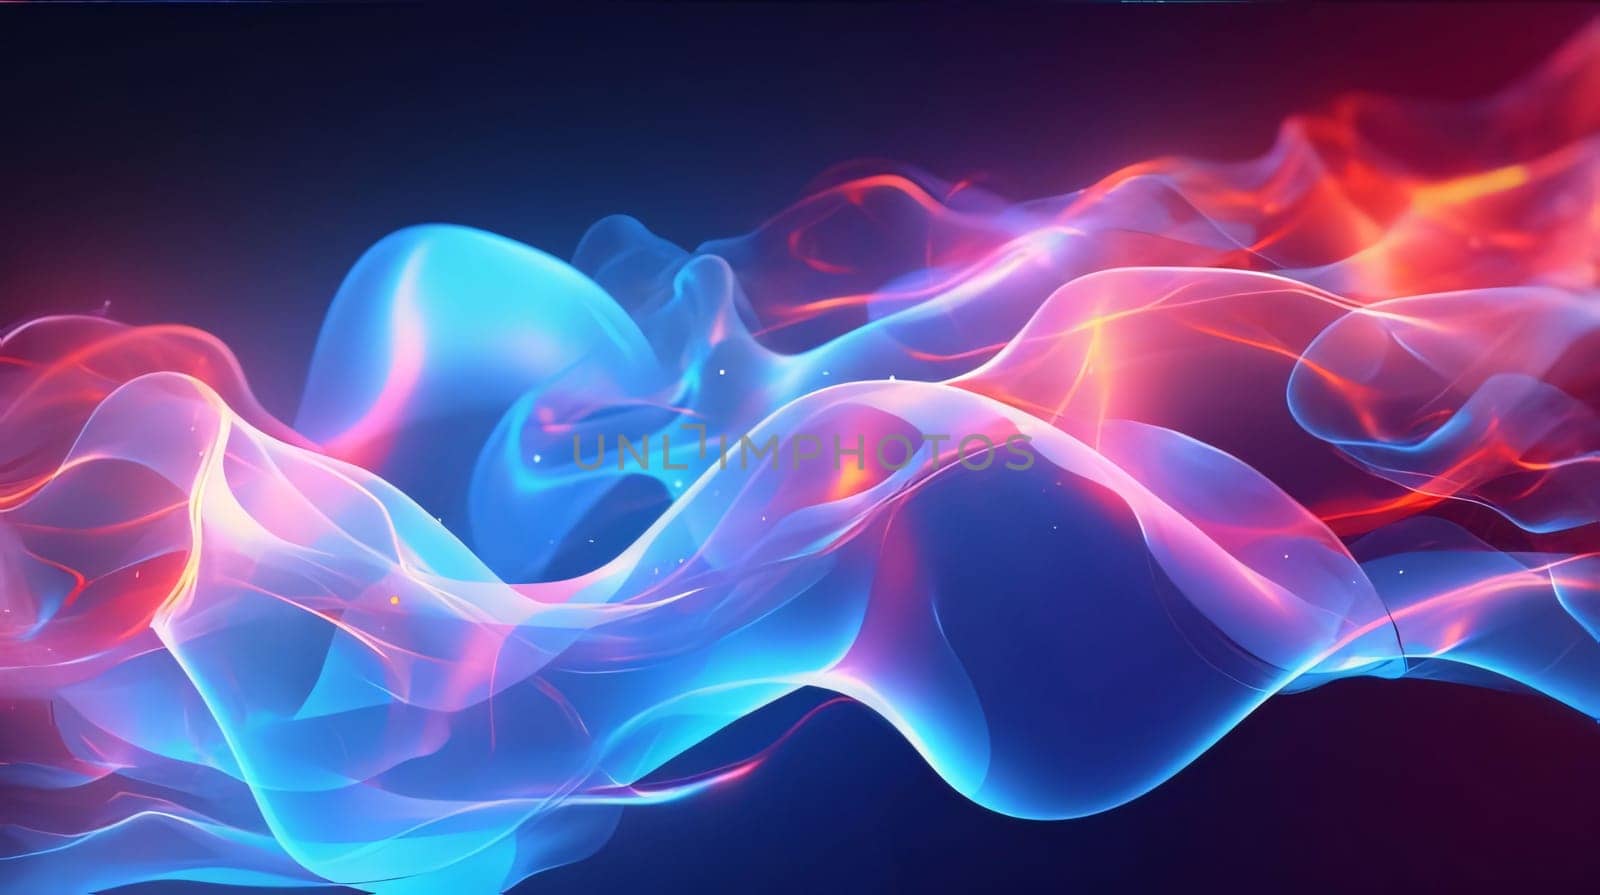 abstract background with blue and red smoke, 3d render illustration by ThemesS